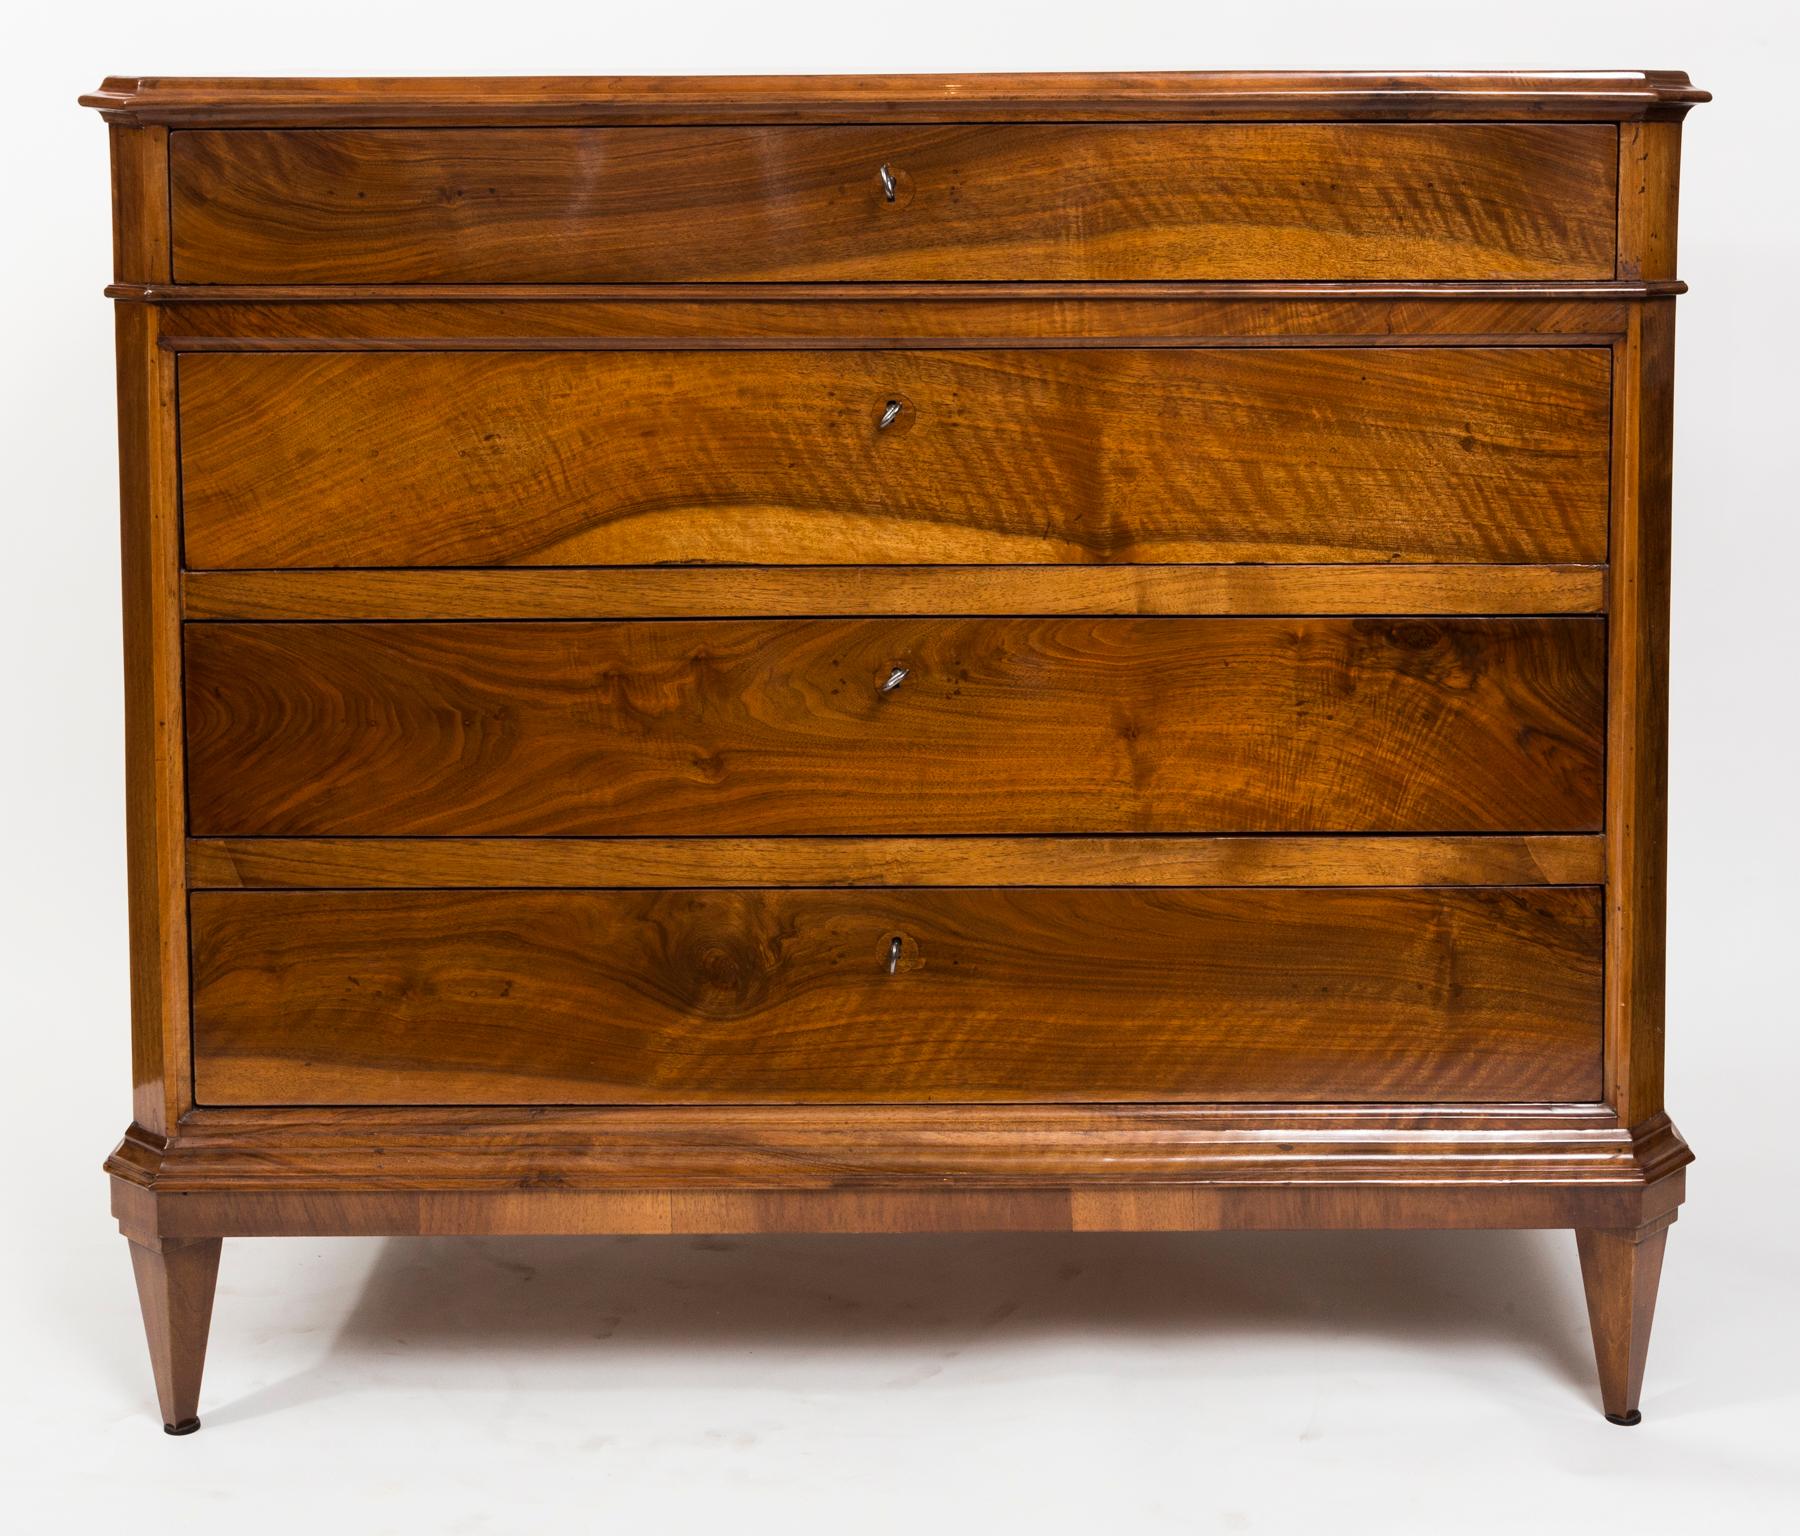 A very lovely pair of late 19th century taller chests comprised of five drawers with chamfered front edges finishing to straight tapered legs. Made of  solid walnut  in very warm honey walnut color.

A working key is provided for each drawer.